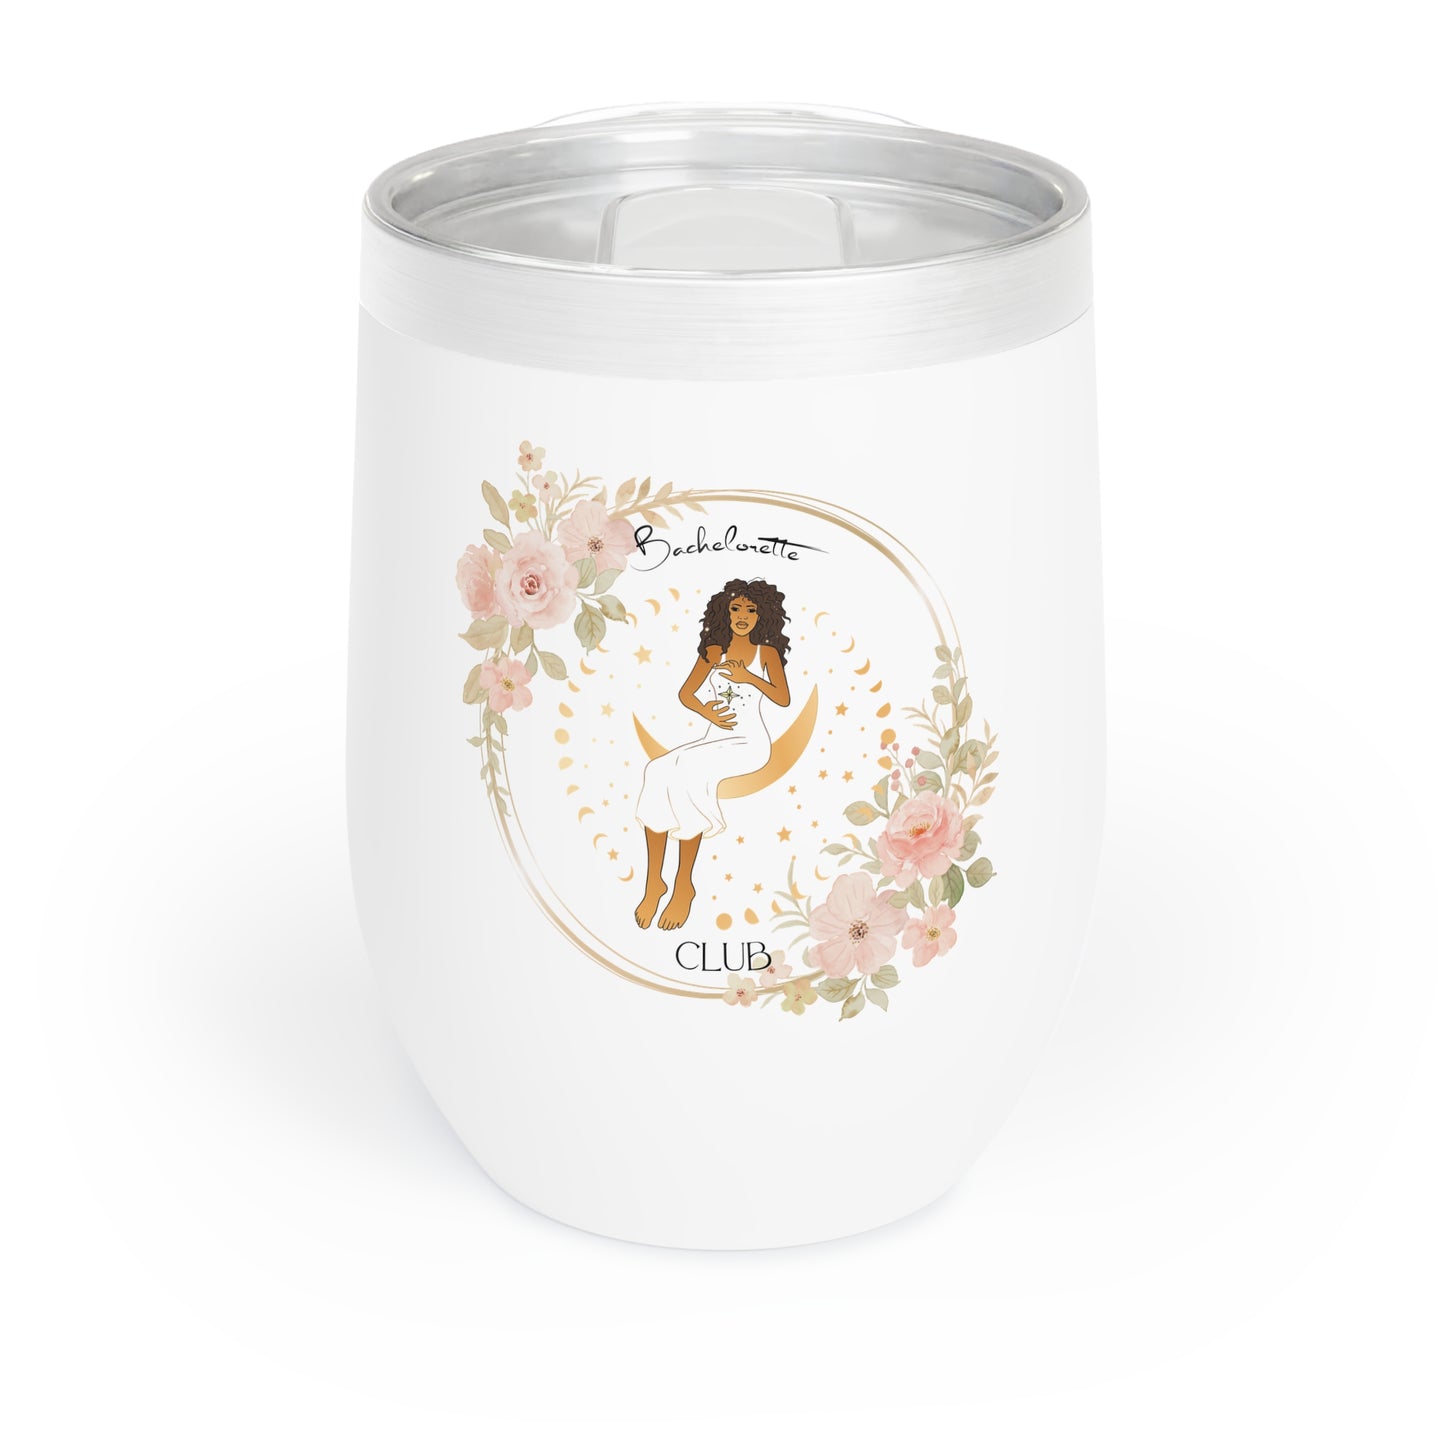 Boho Bride Bridesmaid Tumbler, Bridal Party Wine Glass - The Witchy Gypsy